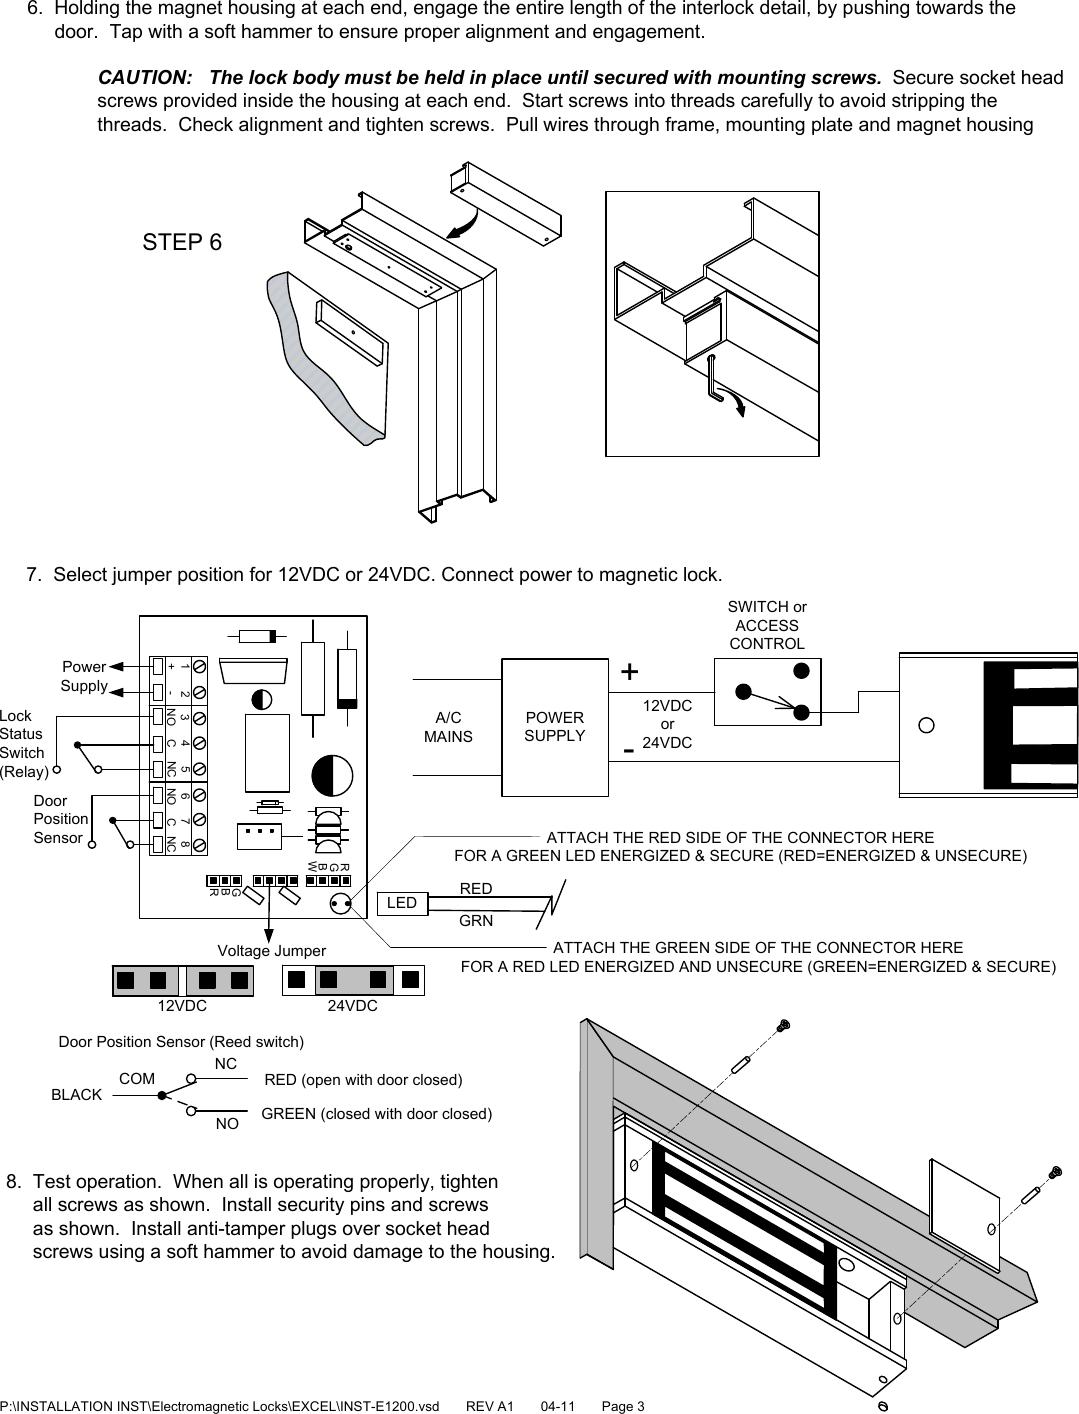 Page 3 of 4 - SDC INST-E1200 Installation Instructions E1200 Series Magnetic Lock